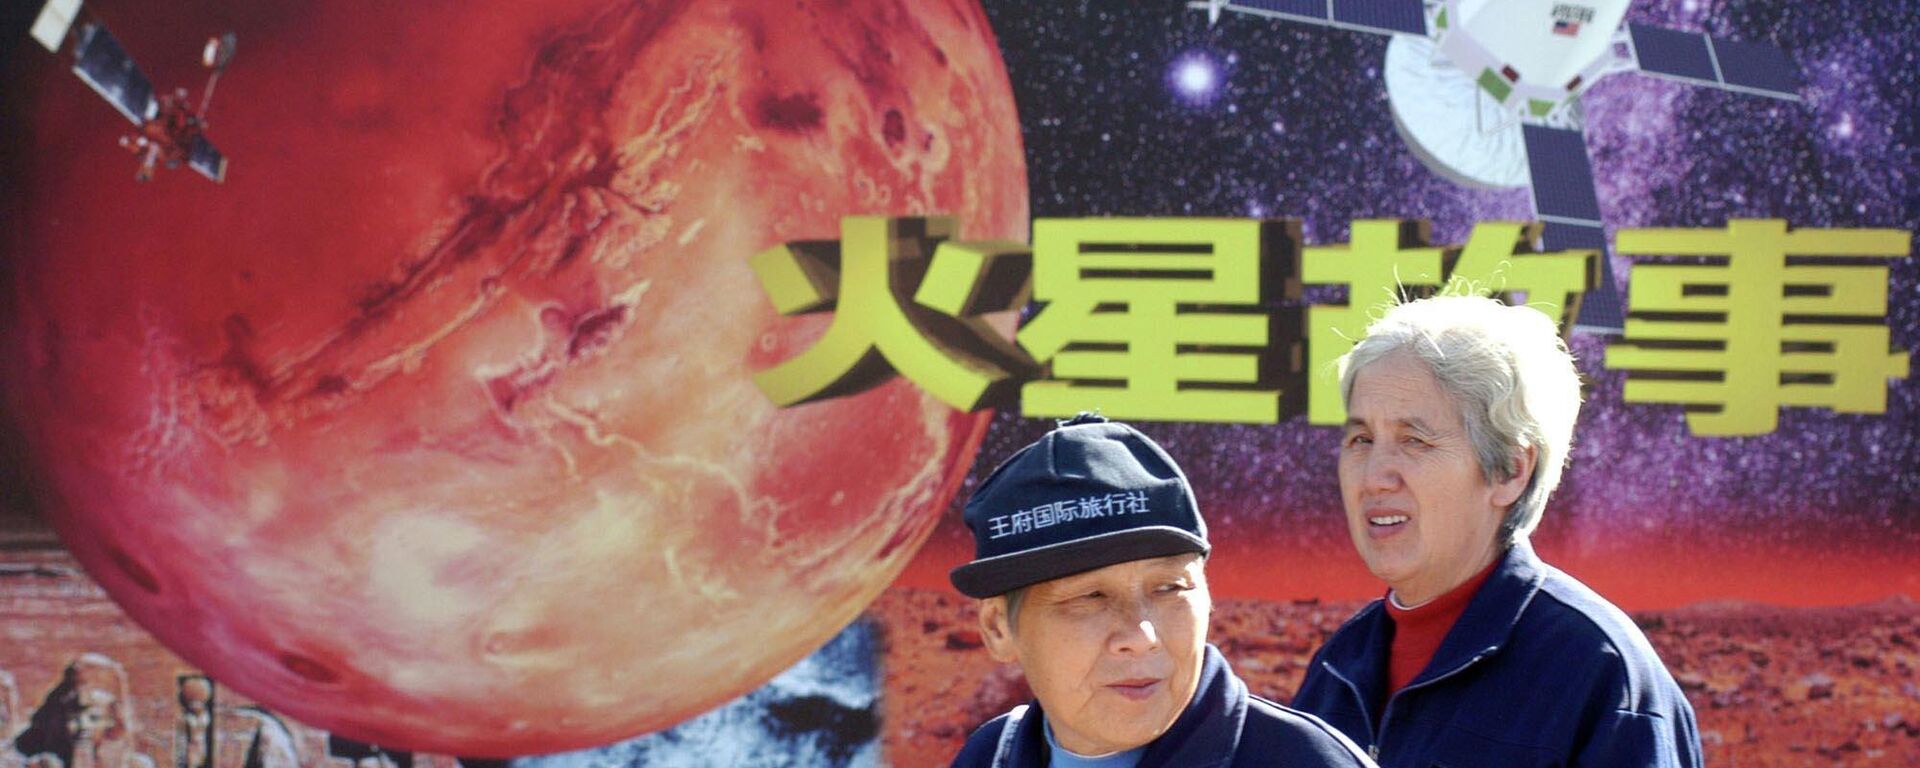 People walk past a propaganda of an event called Mars Story at a planetarium Tuesday Oct. 14, 2003 in Beijing, China - Sputnik International, 1920, 07.06.2022